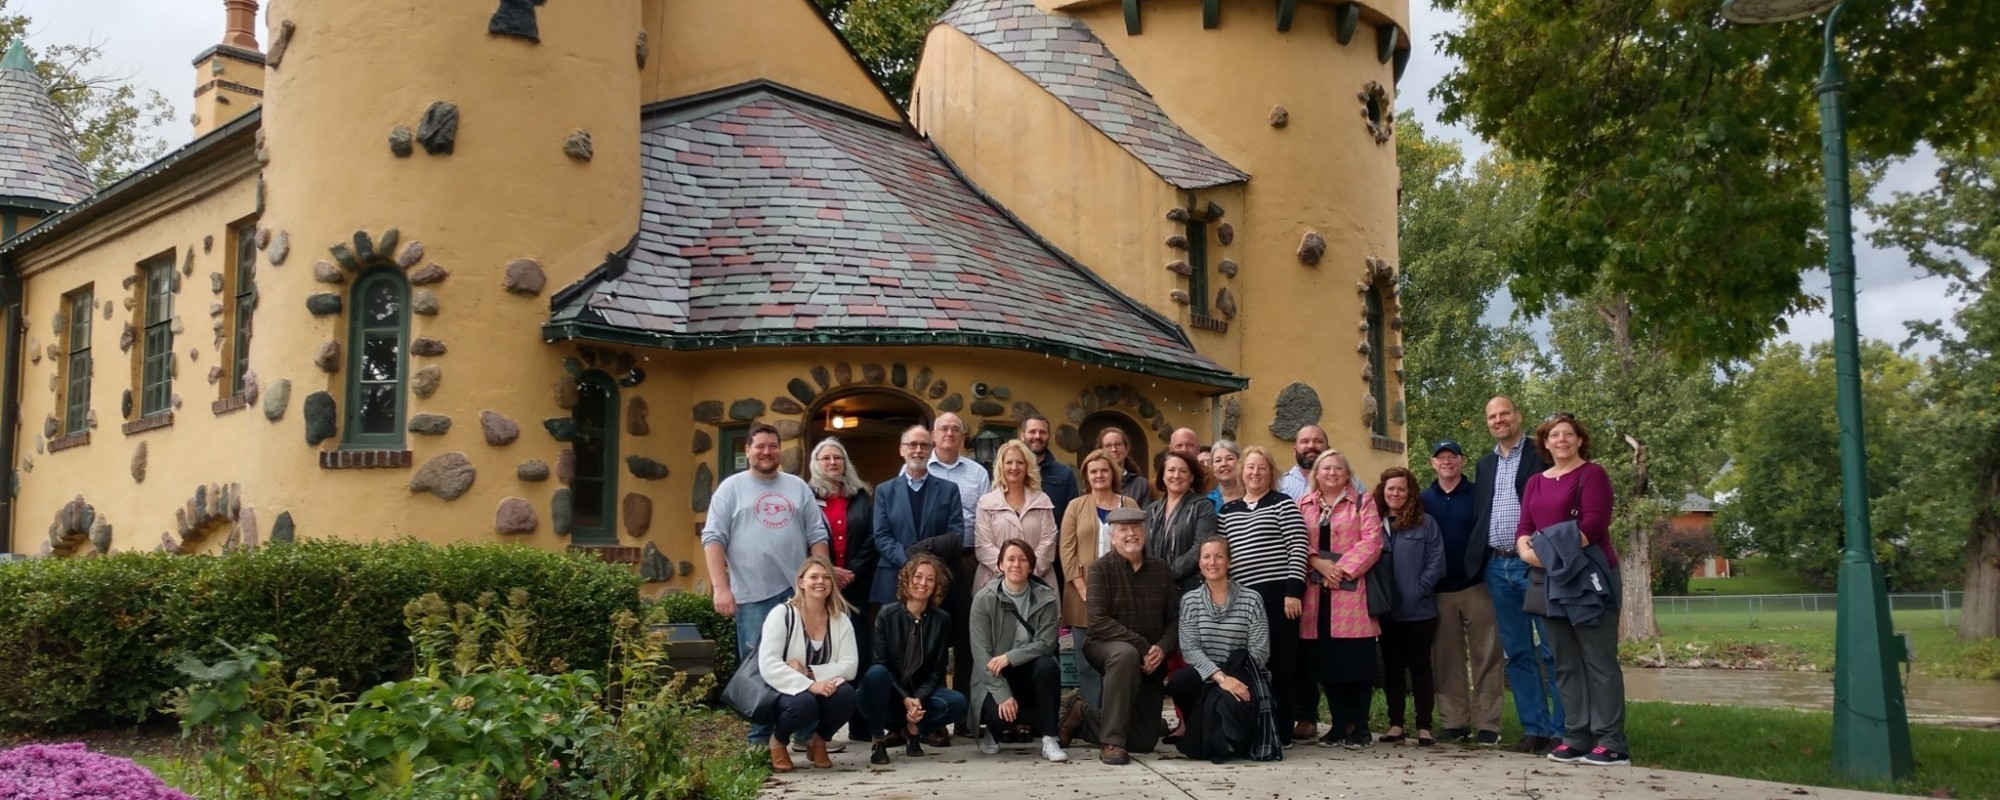 A large group of people gather for a group photo in front of the historic Curwood Castle.